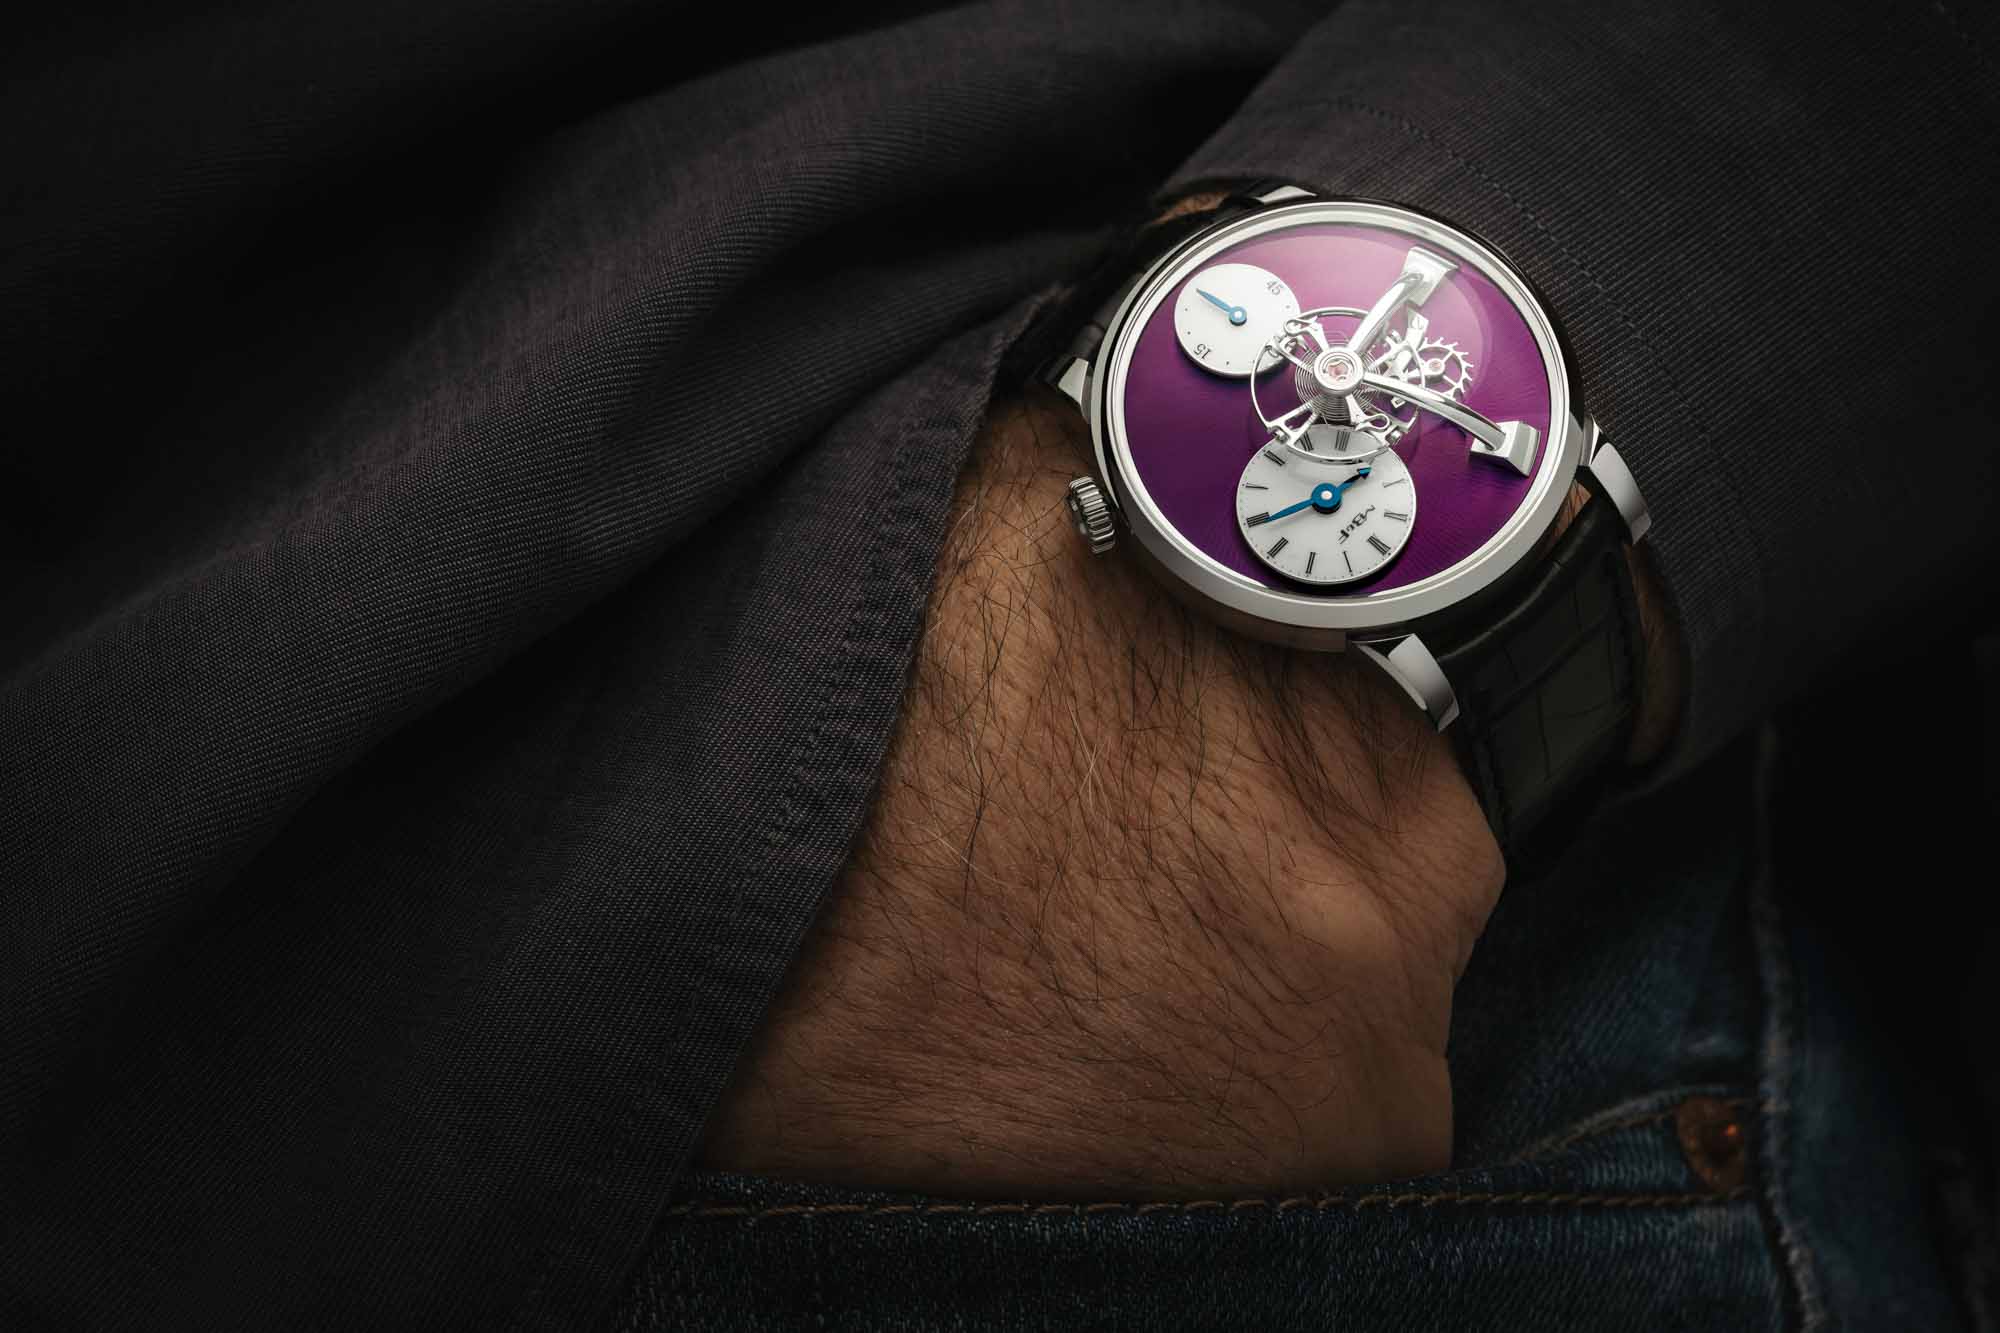 18k white gold with a purple dial plate LM101